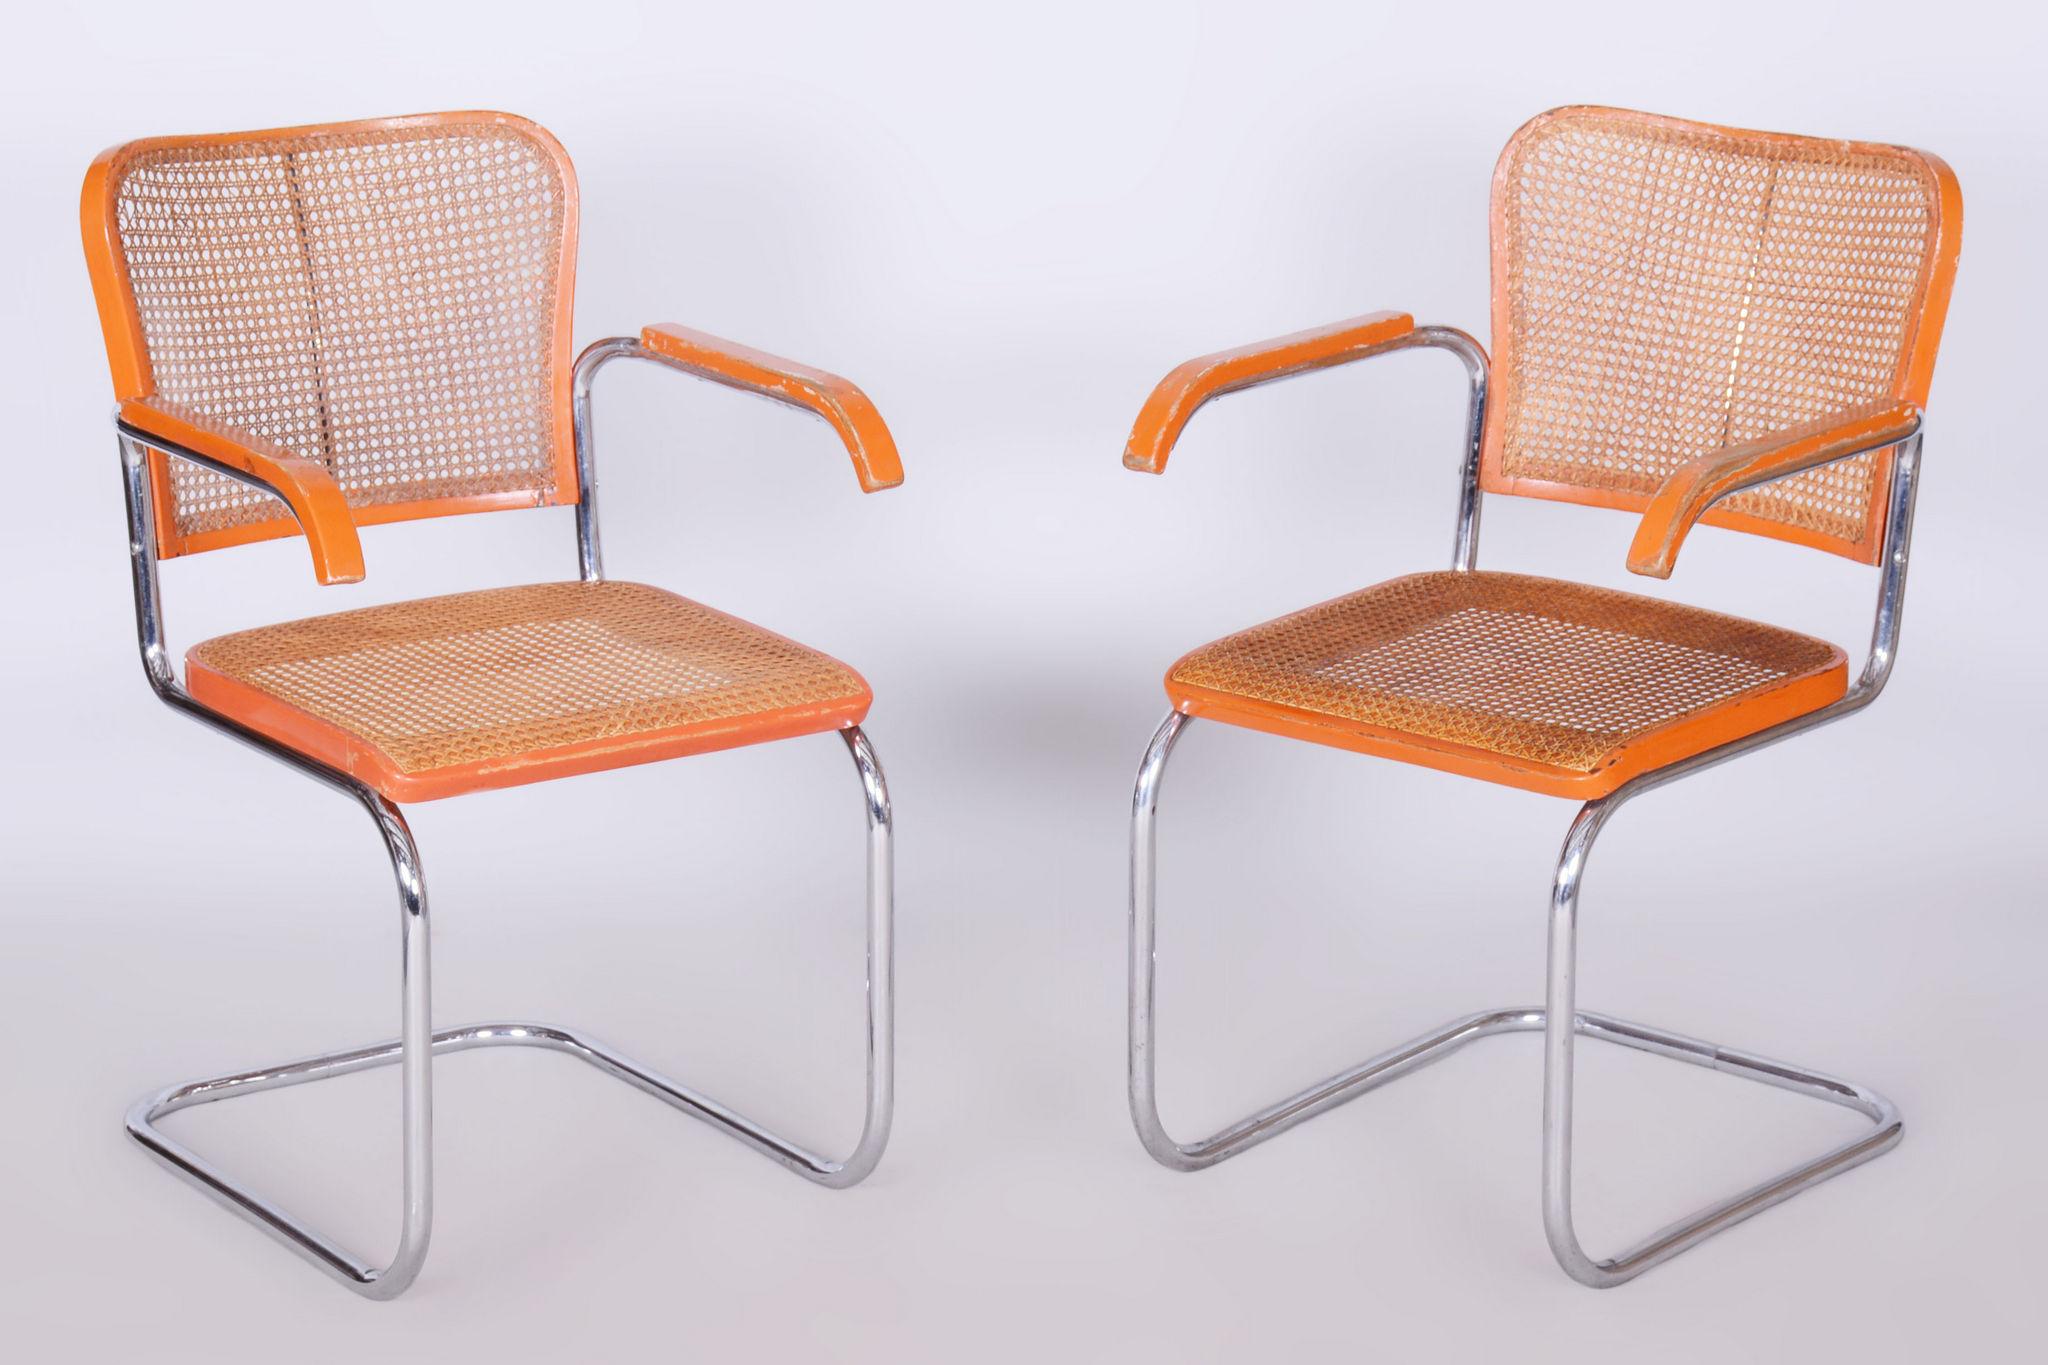 Set of two restored beech Bauhaus Armchairs.

Style: Bauhaus
Maker: Robert Slezak
Period: 1930-1939
Source: Czechia
Material: Beech, Chrome-plated Steel, Rattan.

In pristine original condition, the item has been professionally cleaned, and its